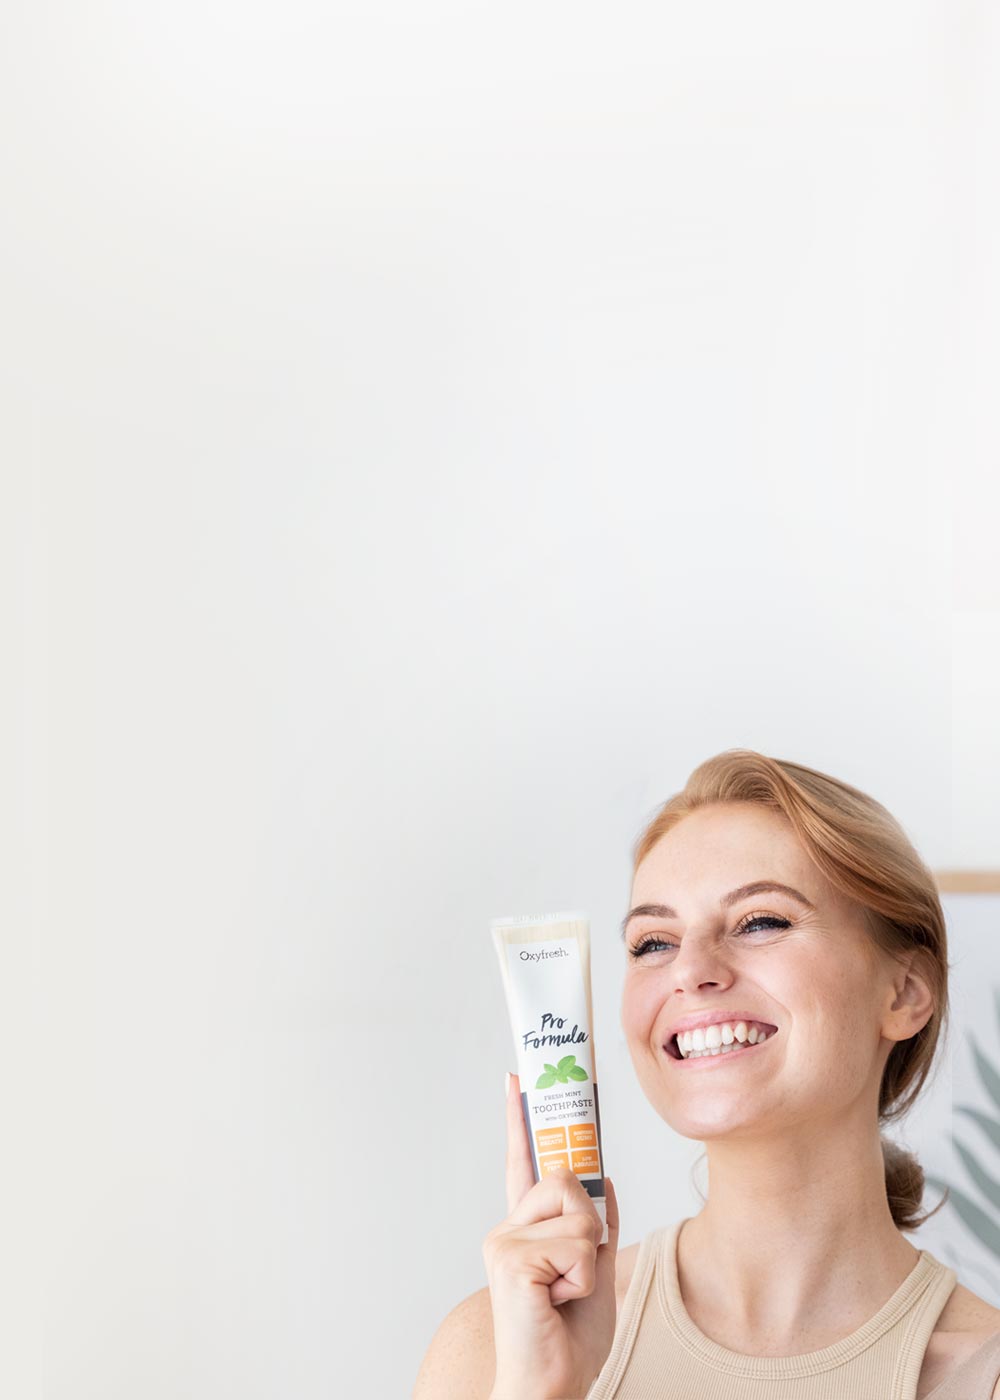 strawberry blond lady smiling brightly holding a tube of oxyfresh pro formula toothpaste which is gentle on her enamel to keep her teeth pearly white 